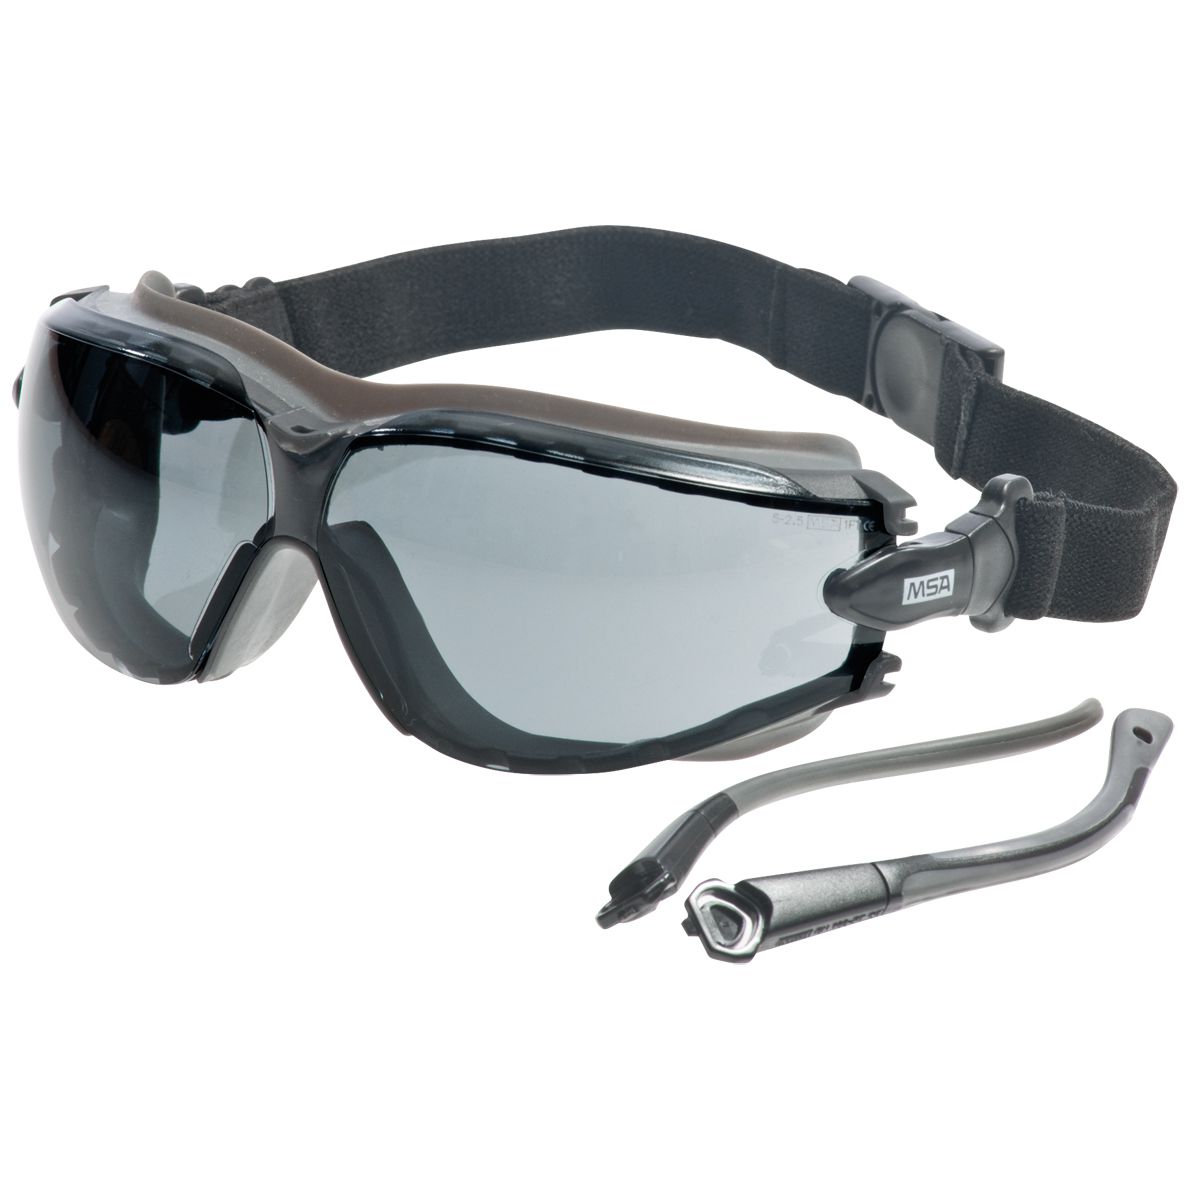 MSA Altimeter full view safety goggles - for spectacle wearers - scratch & fog resistant - EN 166 - black/tinted